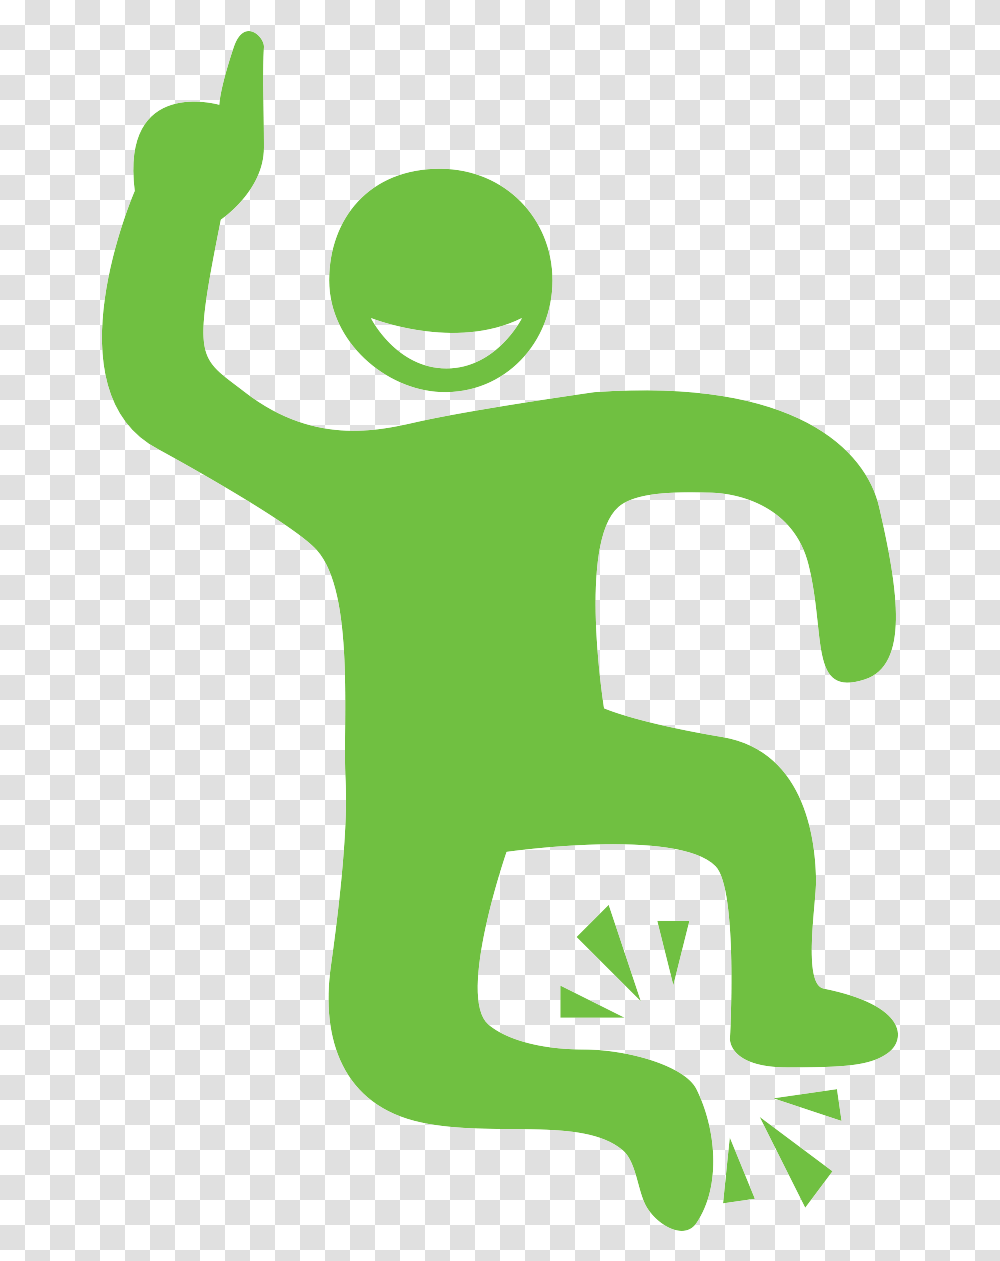 Line Drawing Of Person Jumping And Clicking Their Heels Clicking My Heels, Number, Recycling Symbol Transparent Png